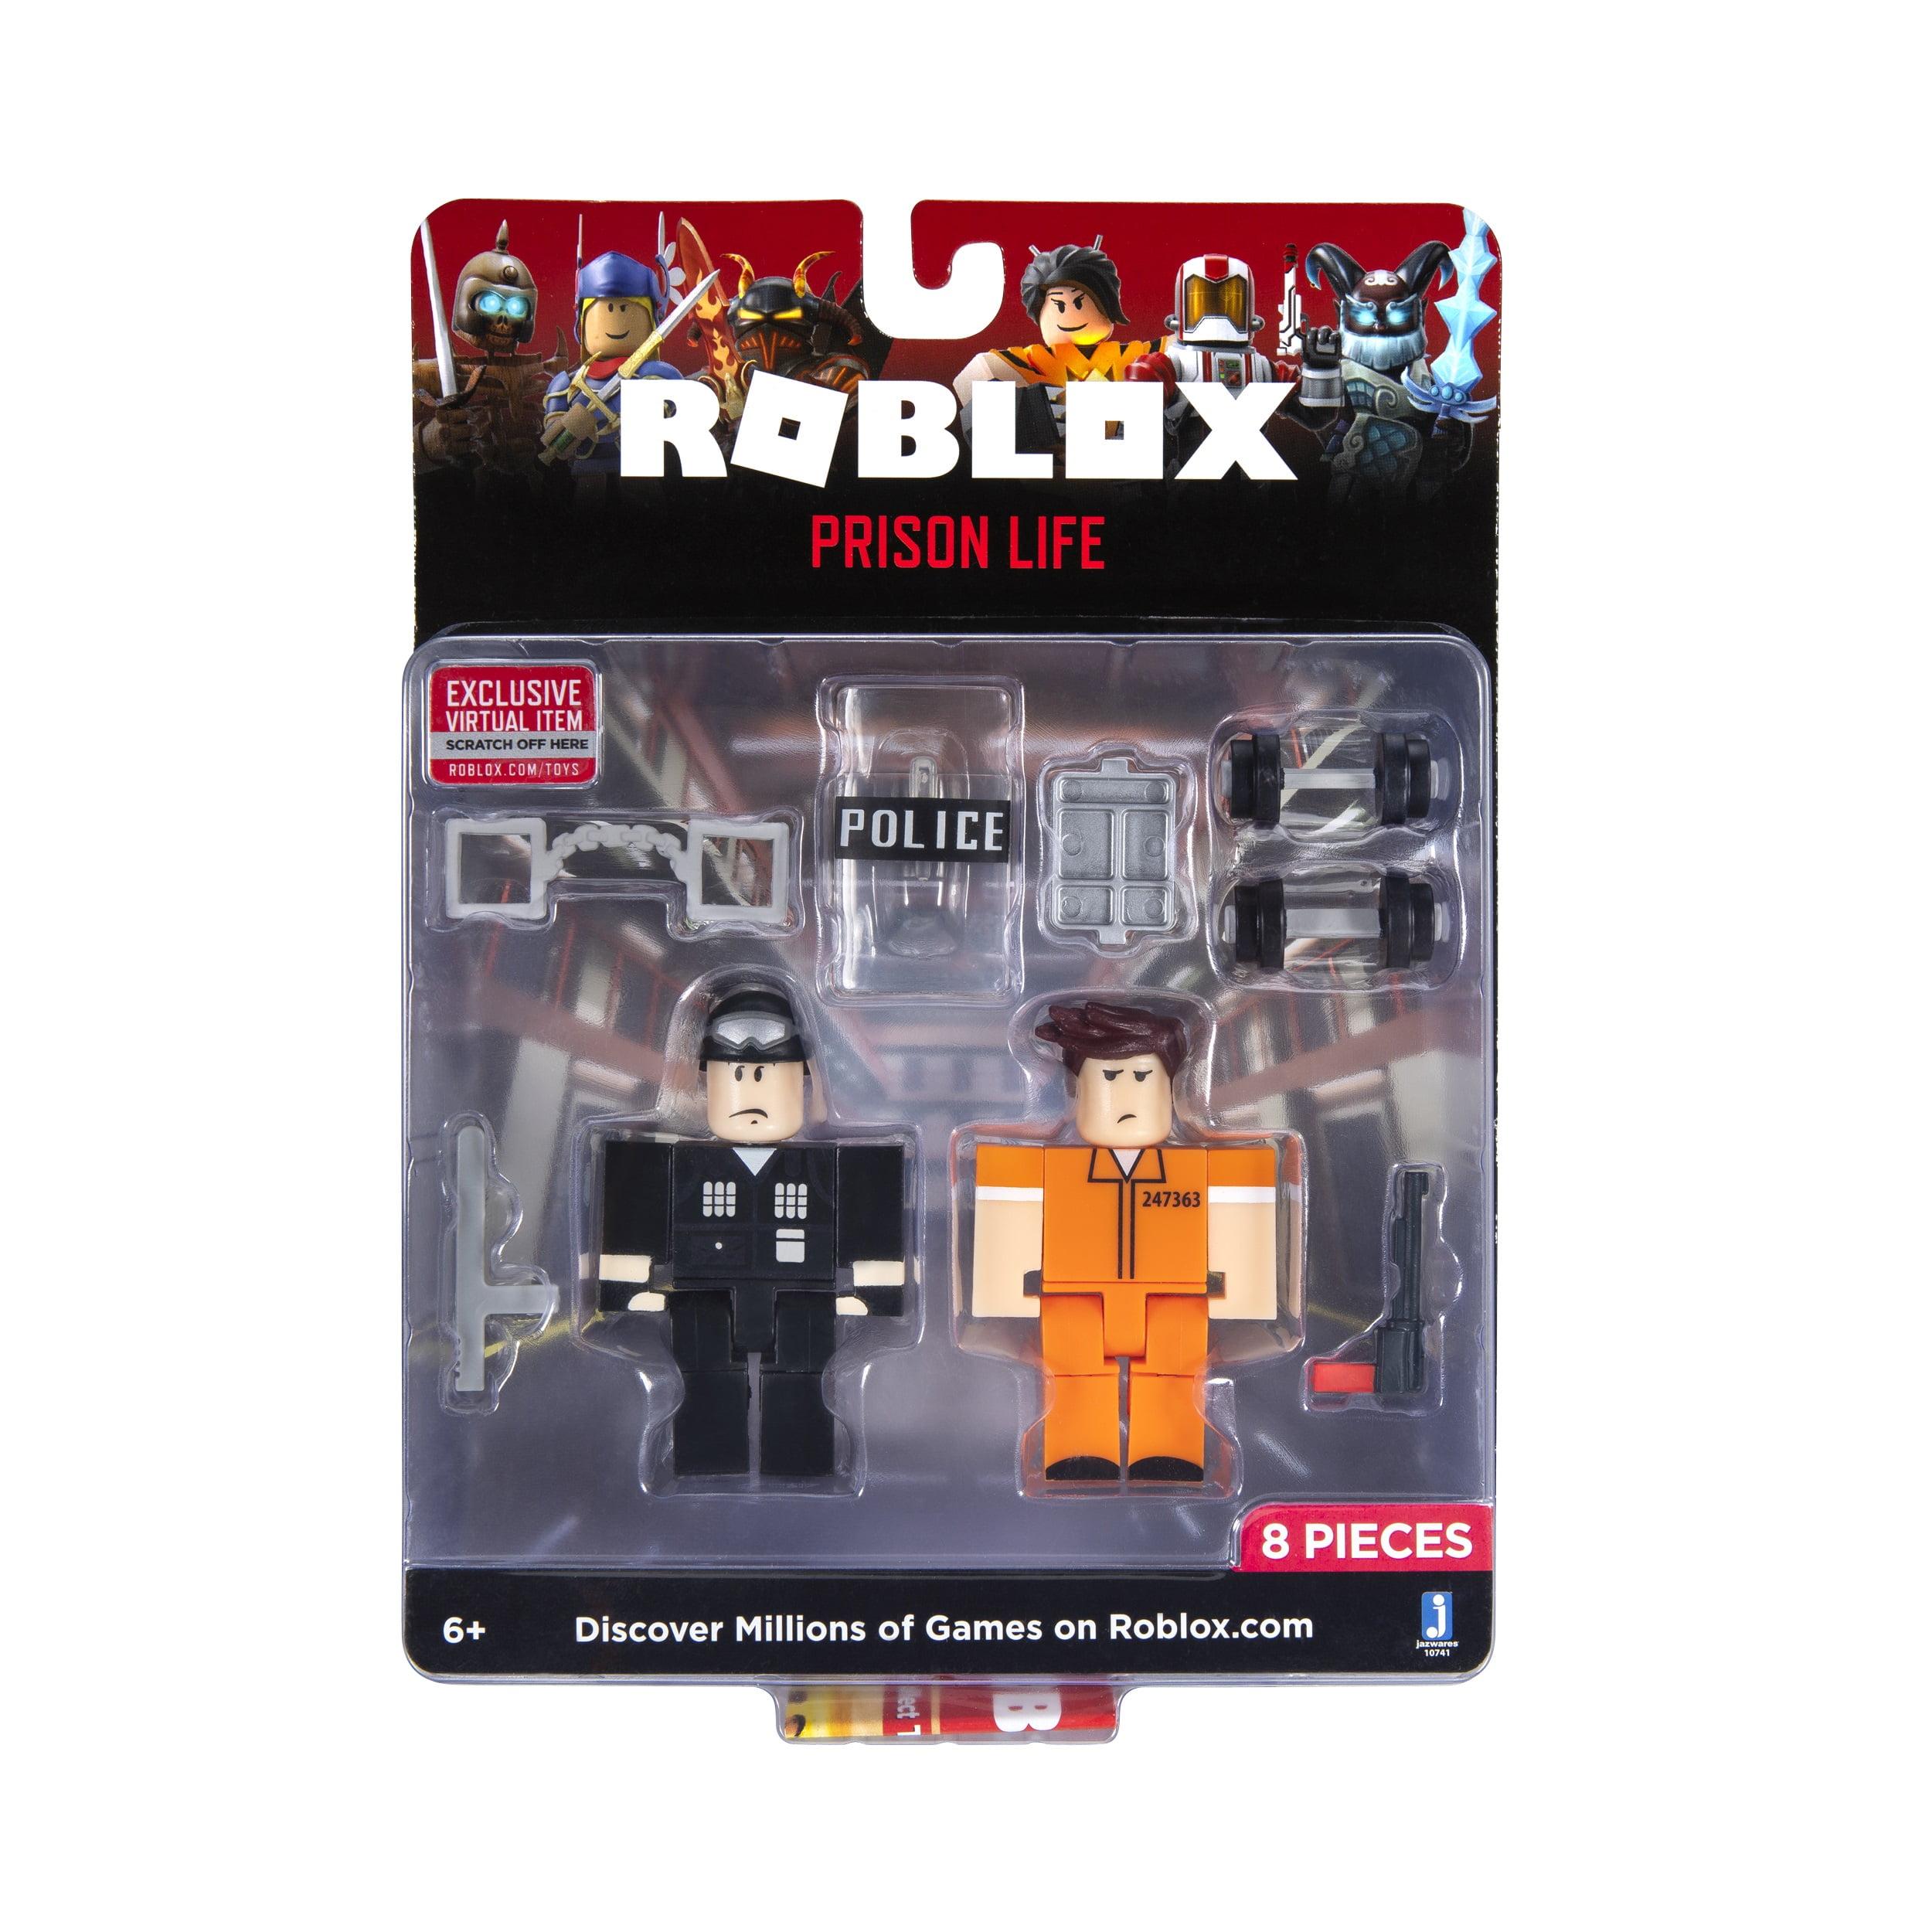 Roblox Action Collection Prison Life Game Pack Includes Exclusive Virtual Item Walmart Com Walmart Com - roblox life games